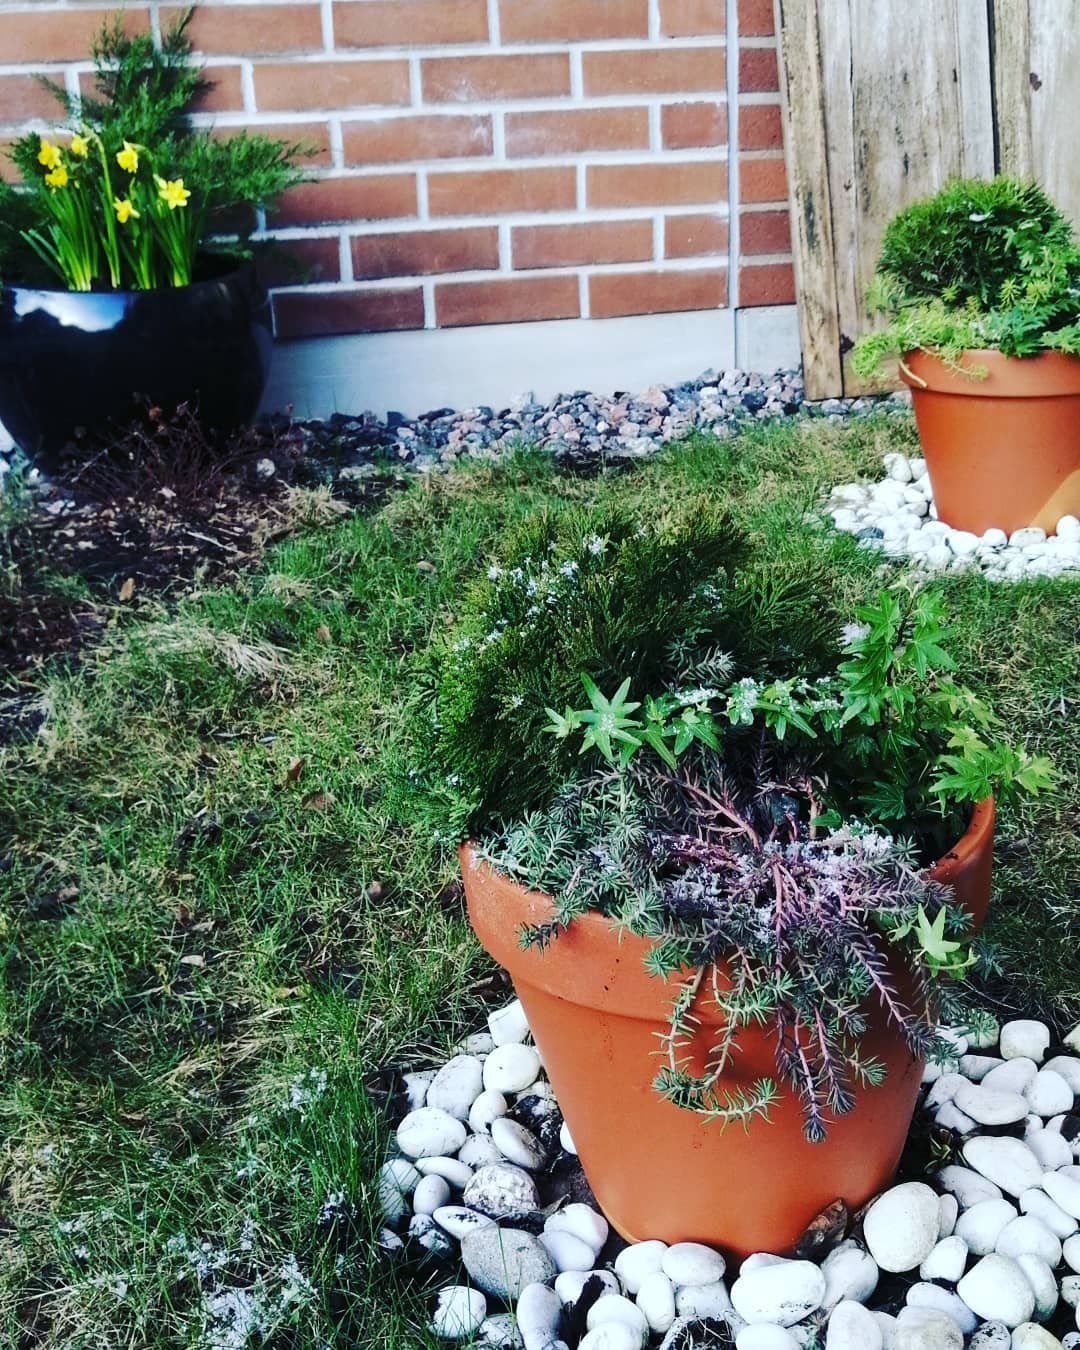 Small potted plants placed throughout landscaping.